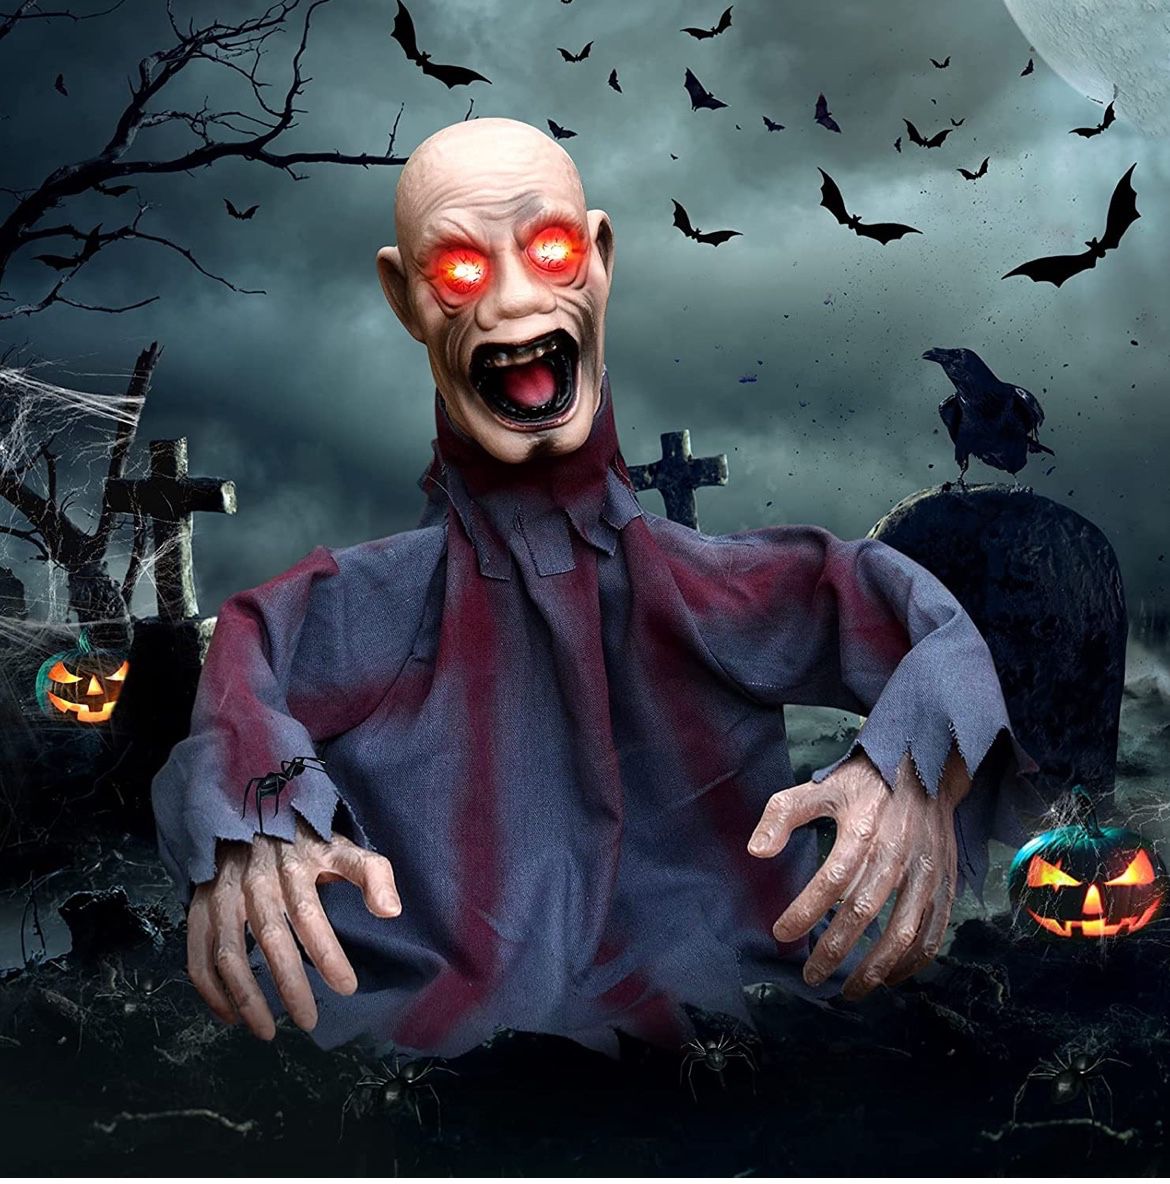 Jogotoll Halloween Decorations Outdoor Scary Halloween Animatronics Zombie Decorations Halloween Props Movable Zombie Groundbreaker with Sound Inducti